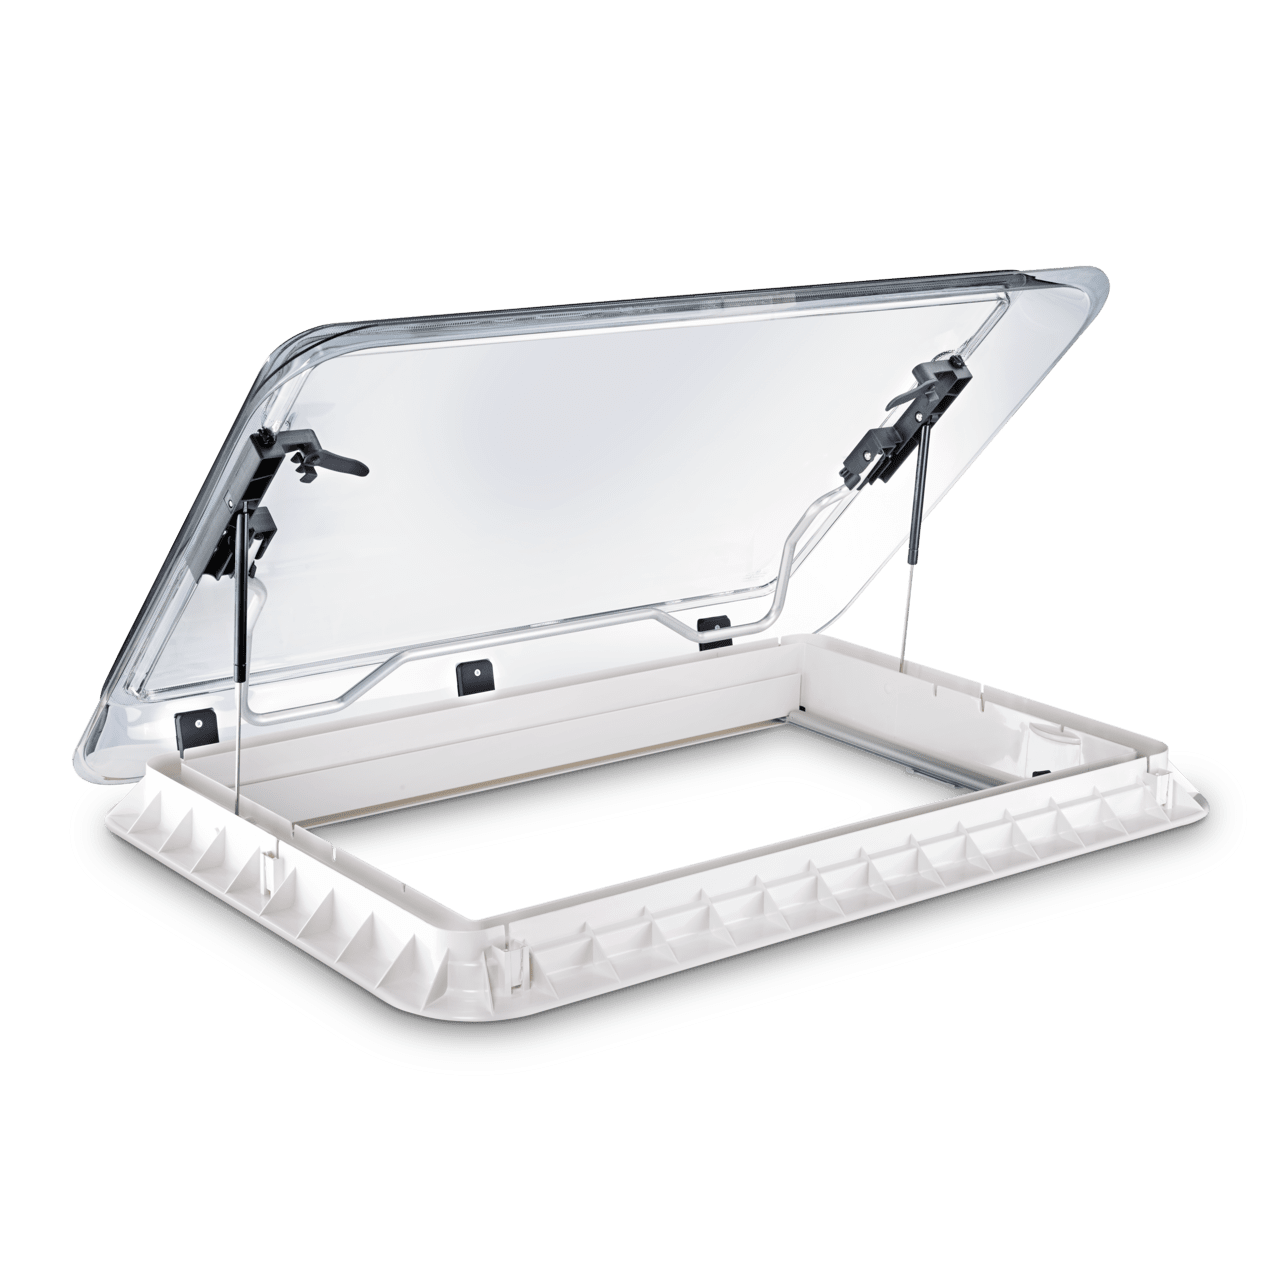 Dometic Heki 2 Rooflight for 25 - 33mm Roof thickeness